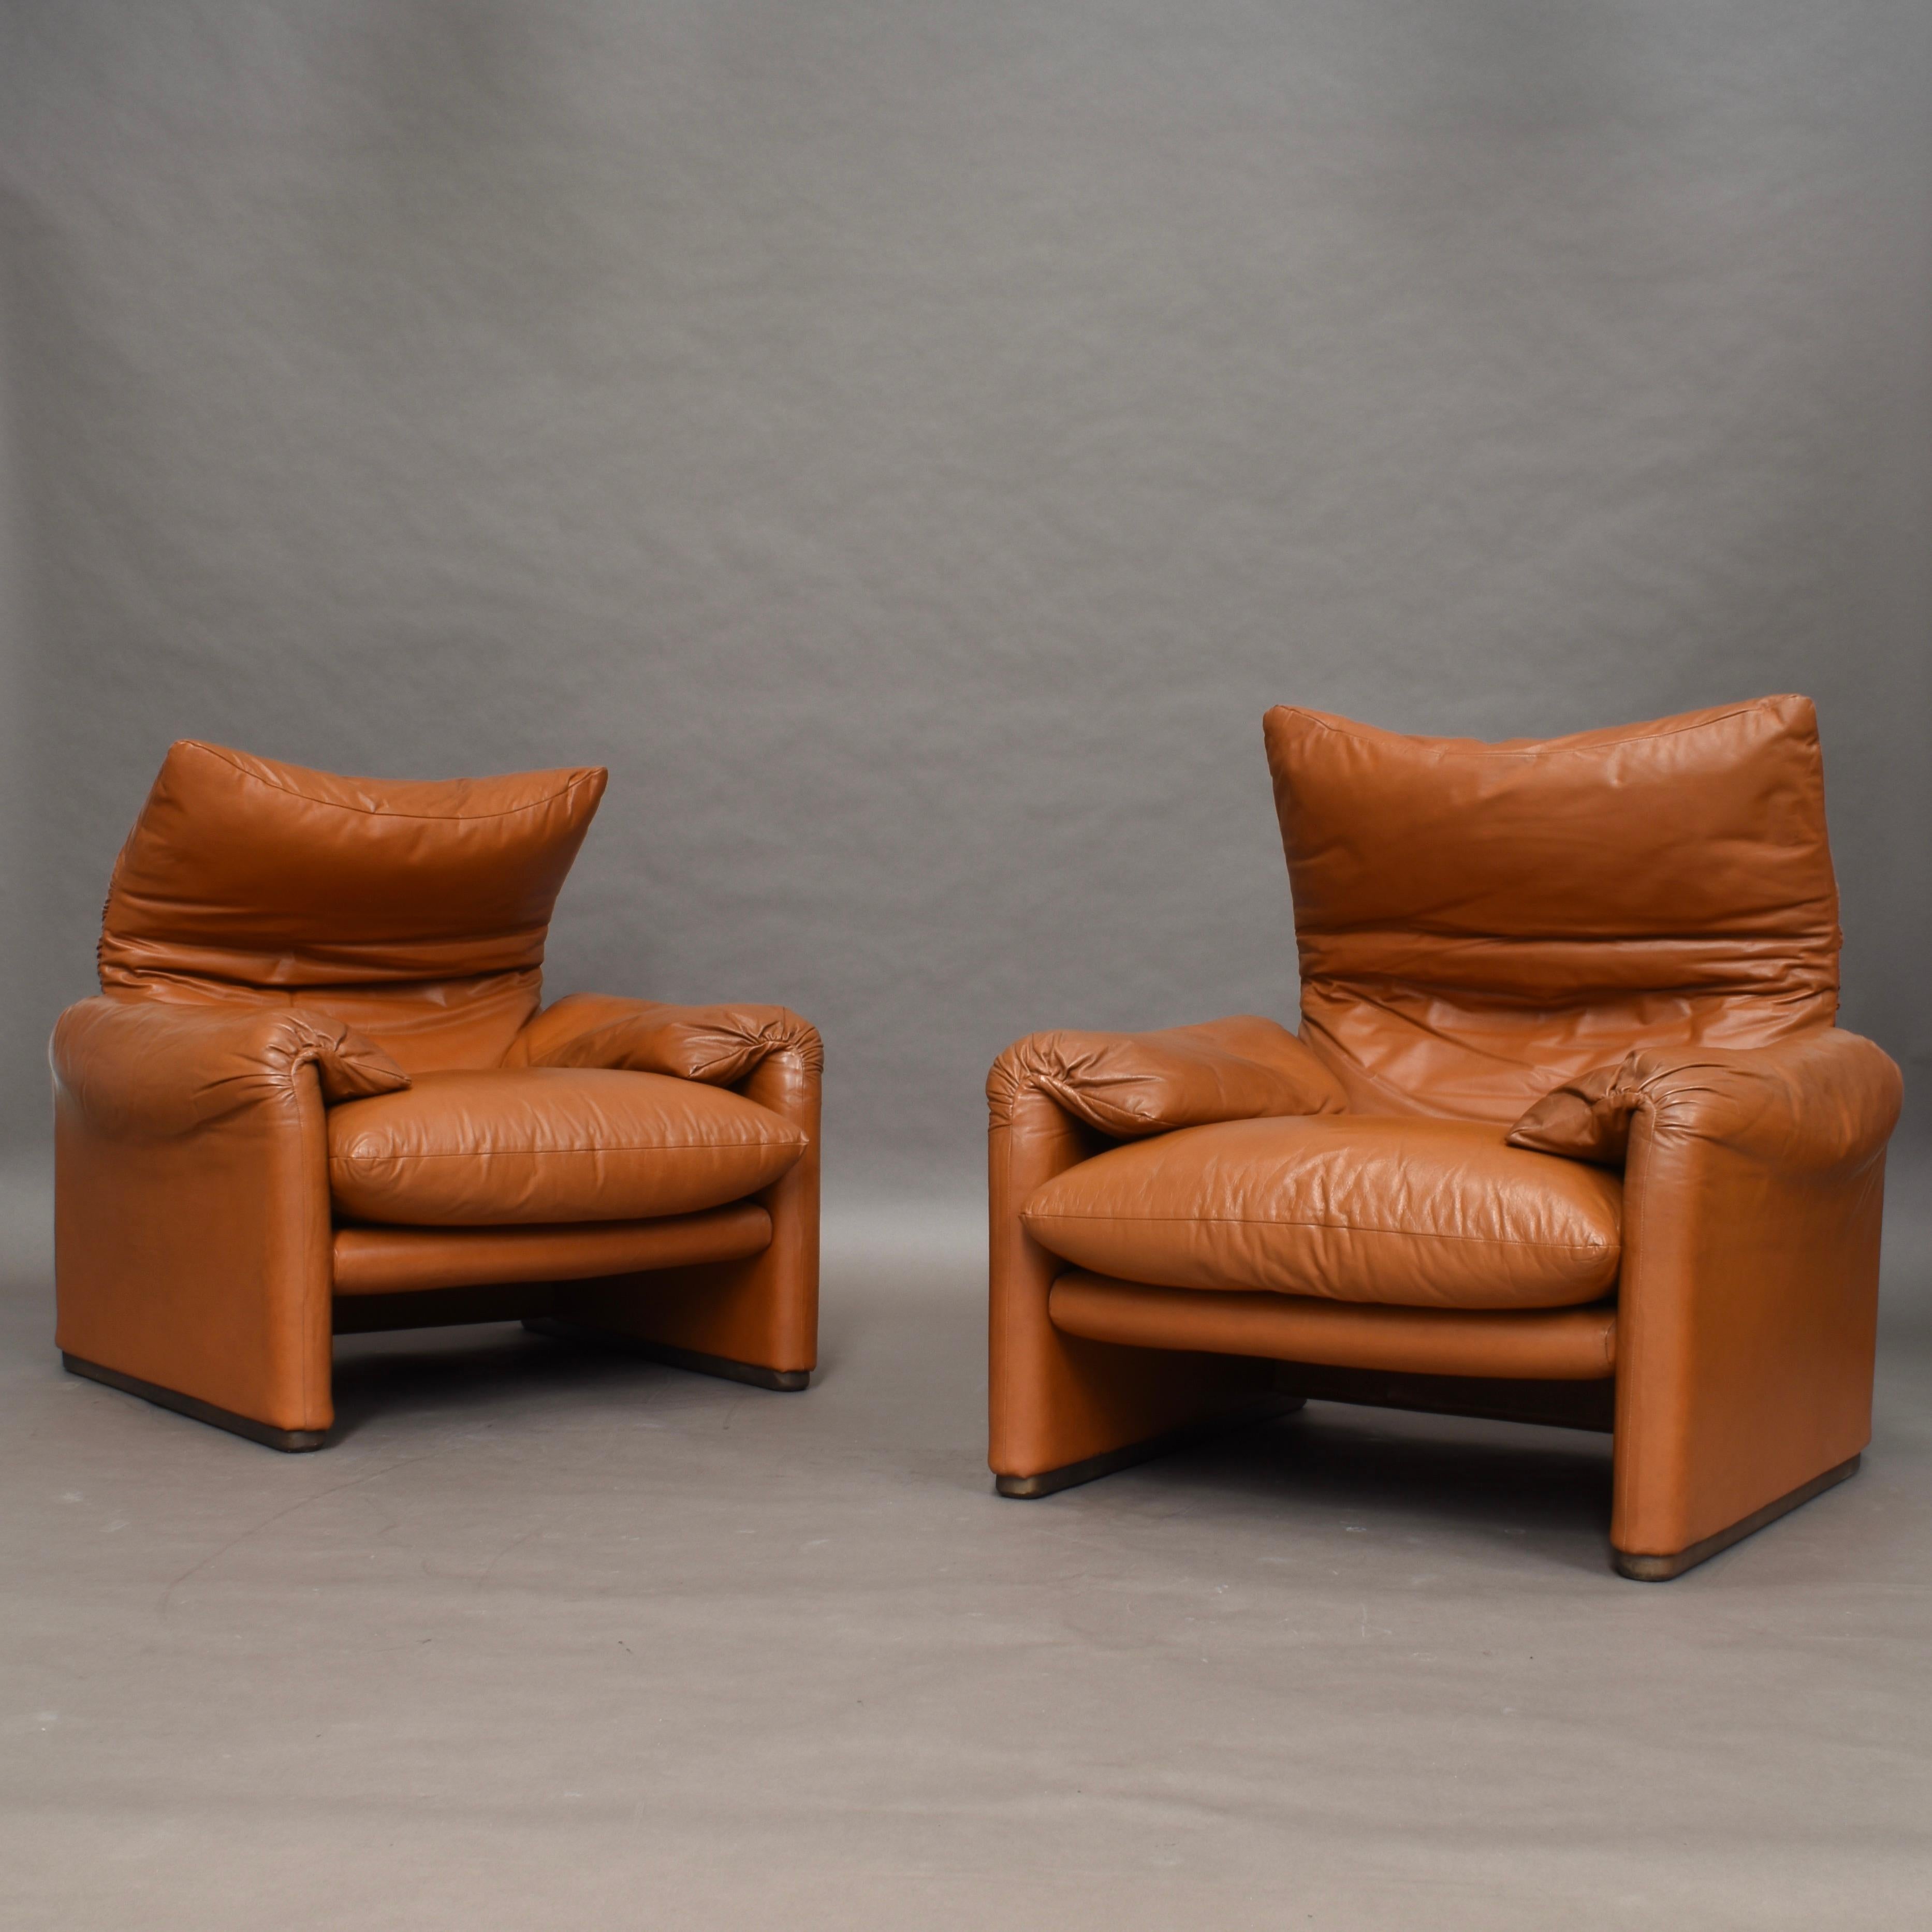 Very early edition Maralunga lounge chairs by Vico Magistretti for Cassina – 1973.

    

The chairs are made in tan colored leather with wood legs. The extractable head-rests work but the mechanisms are a bit weak. The leather has age related